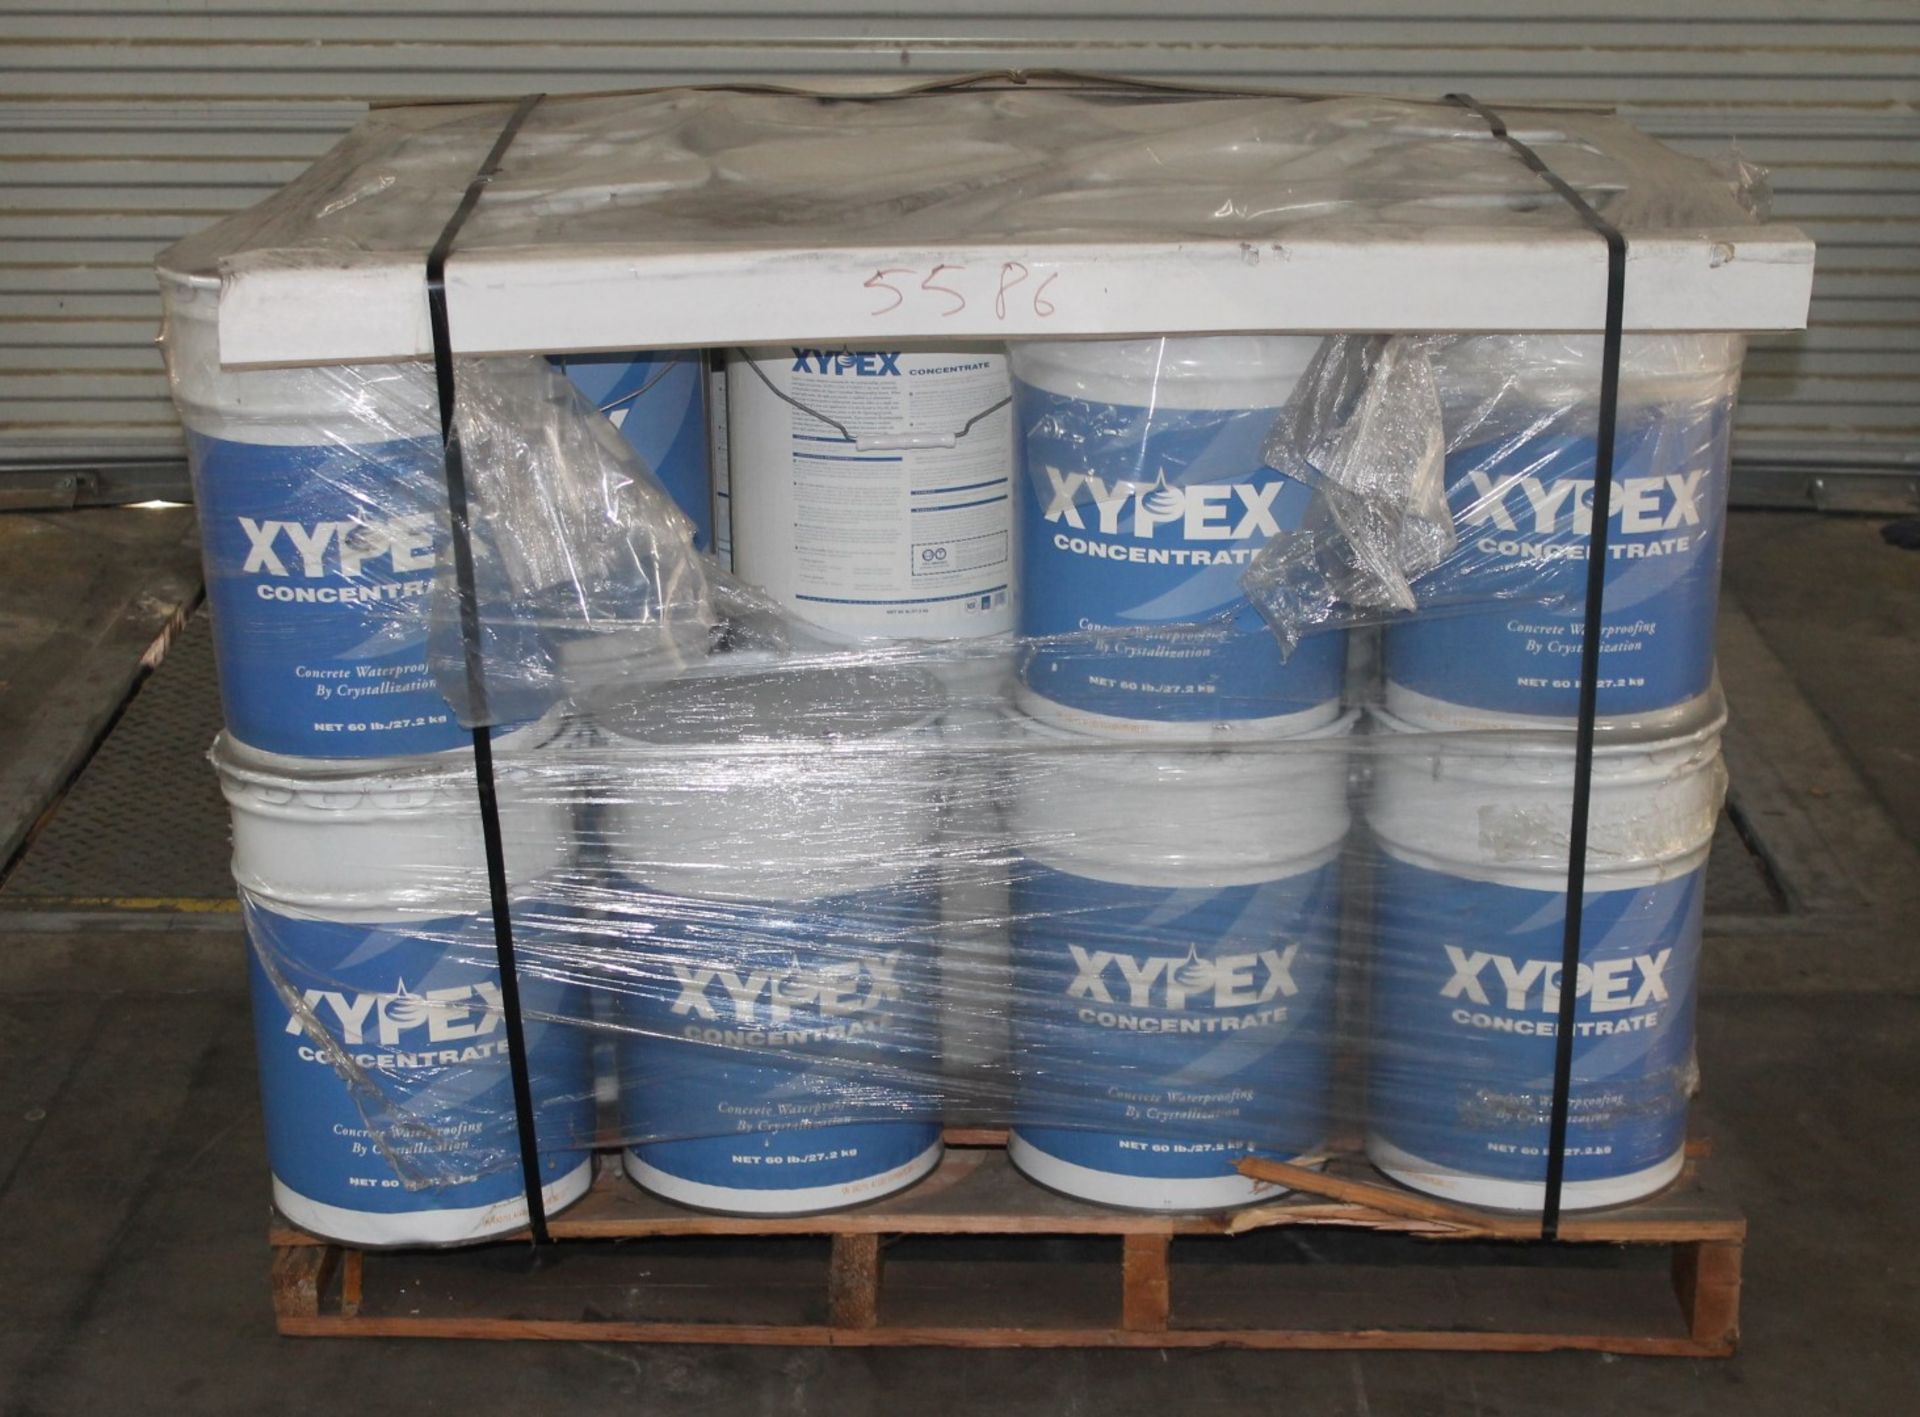 XYPEX CONCRETE WATERPROOFING BY CRYSTALLIZATION